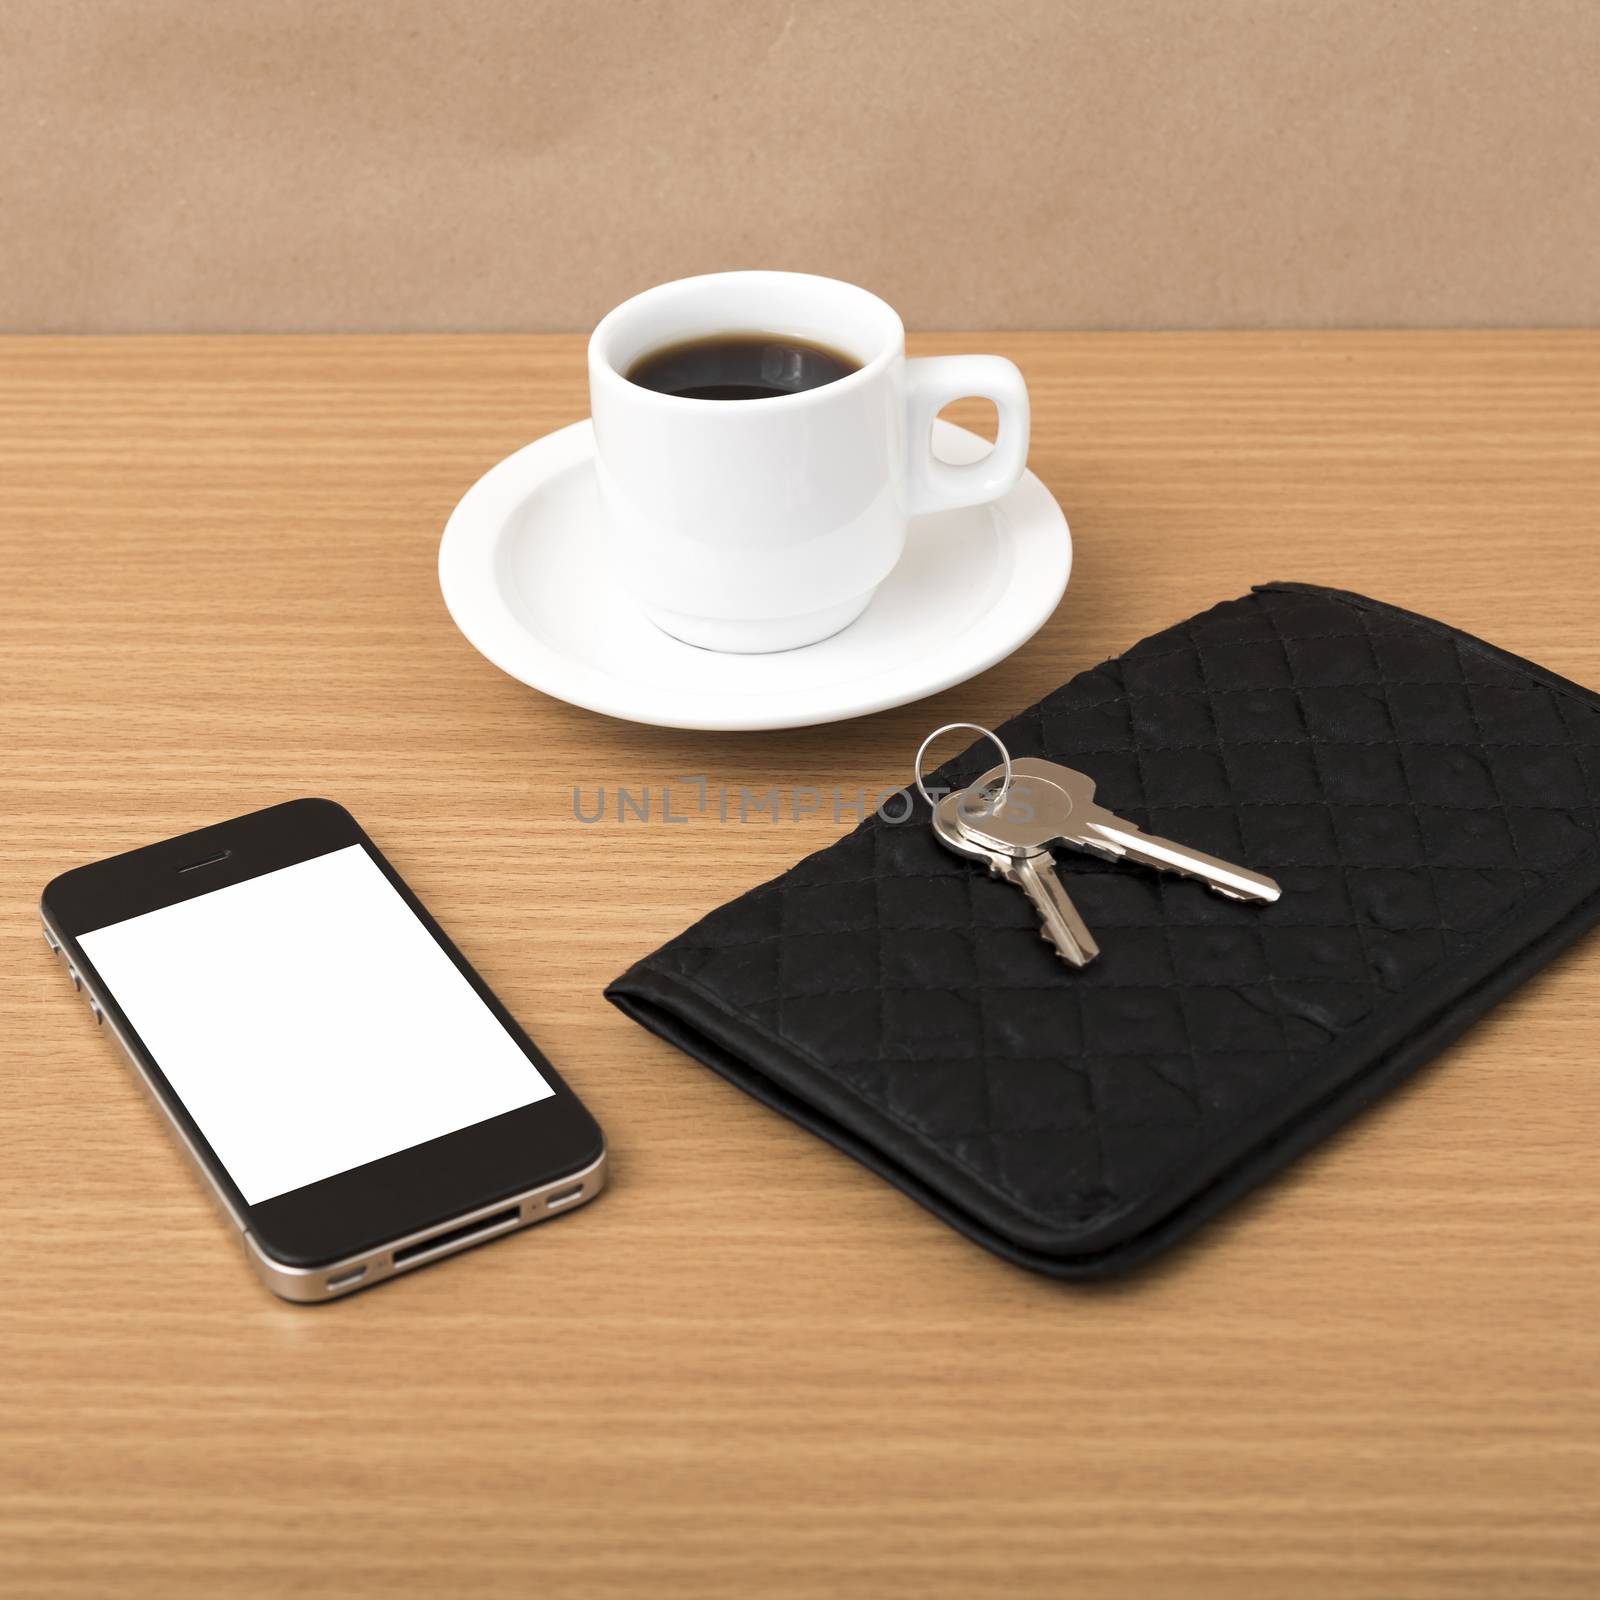 coffee phone key and wallet on wood table background